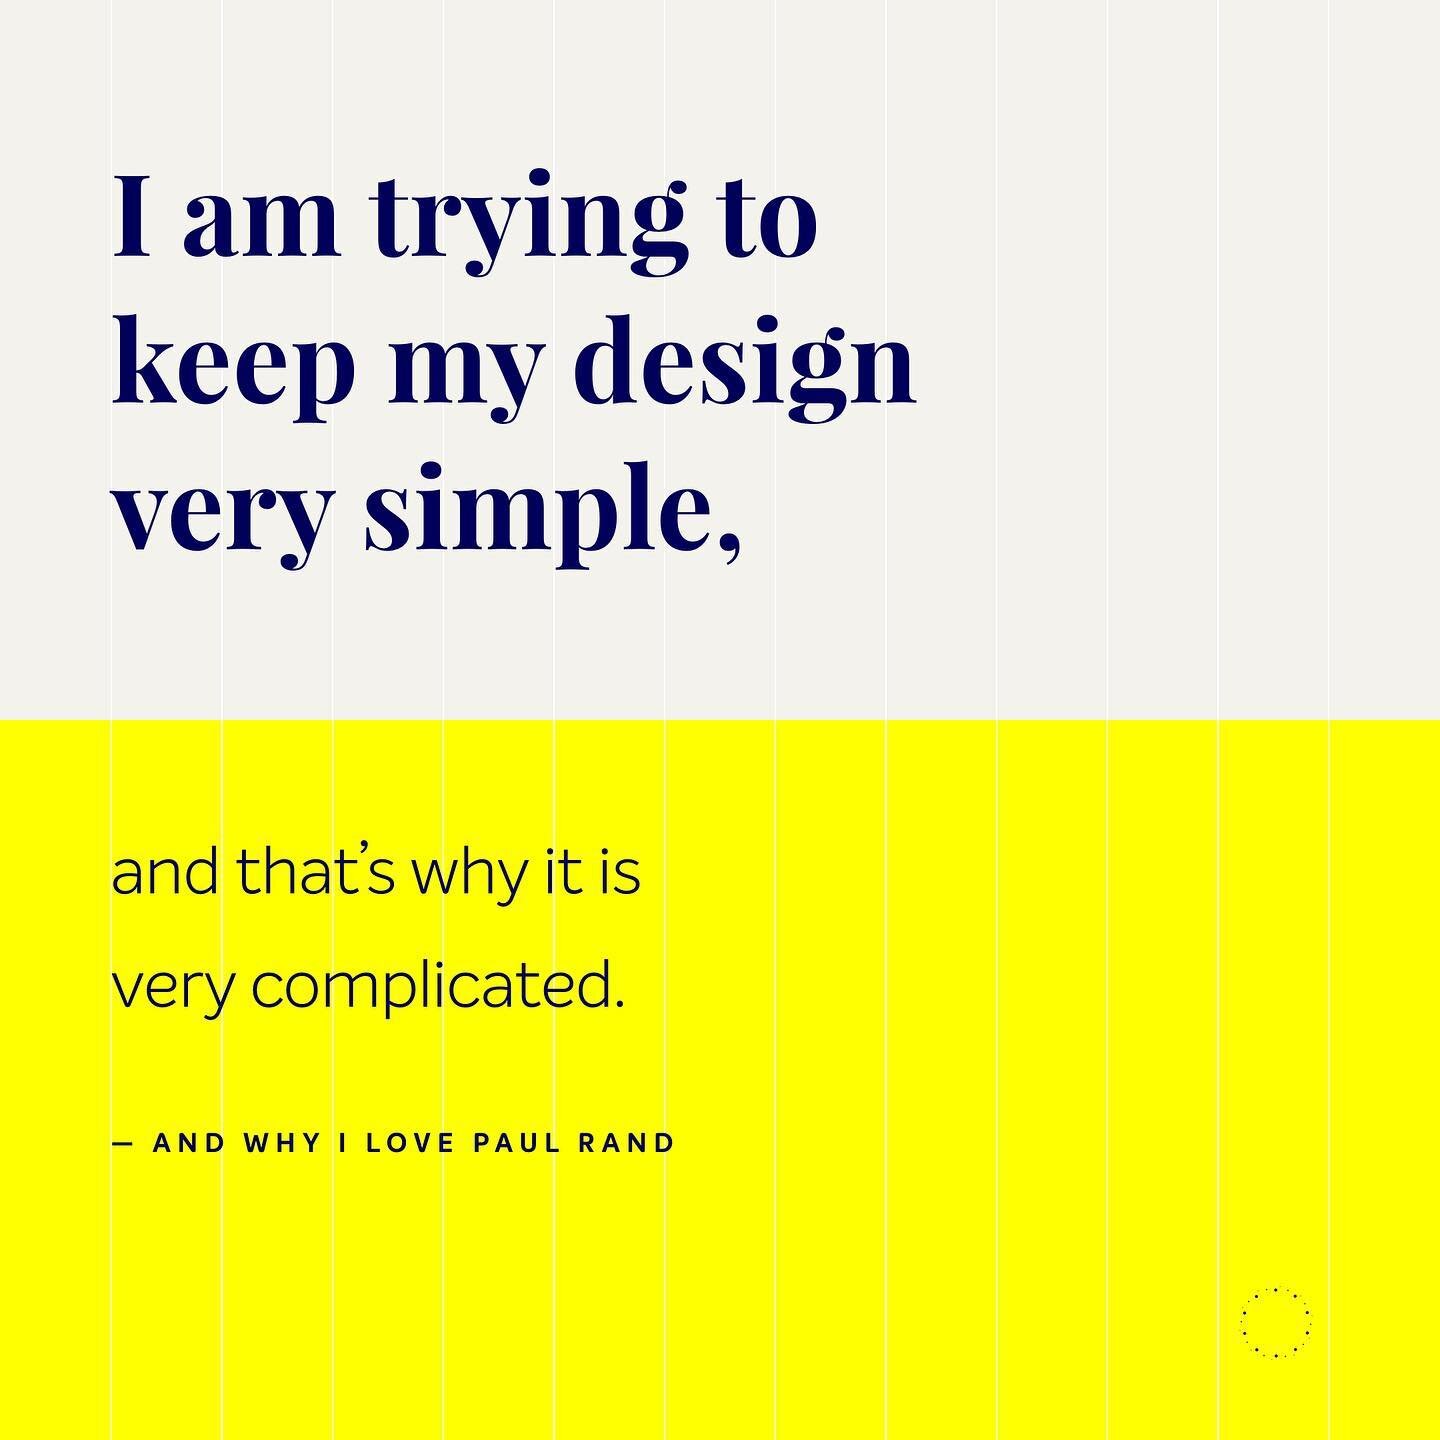 Today I&rsquo;ve read an article about minimal design heading towards it&rsquo;s end. 

I&rsquo;ll probably stay true to my style as long as I believe in the power of visualizing only the essentials without noise. 

#minimal #graphicdesign #paulrand 